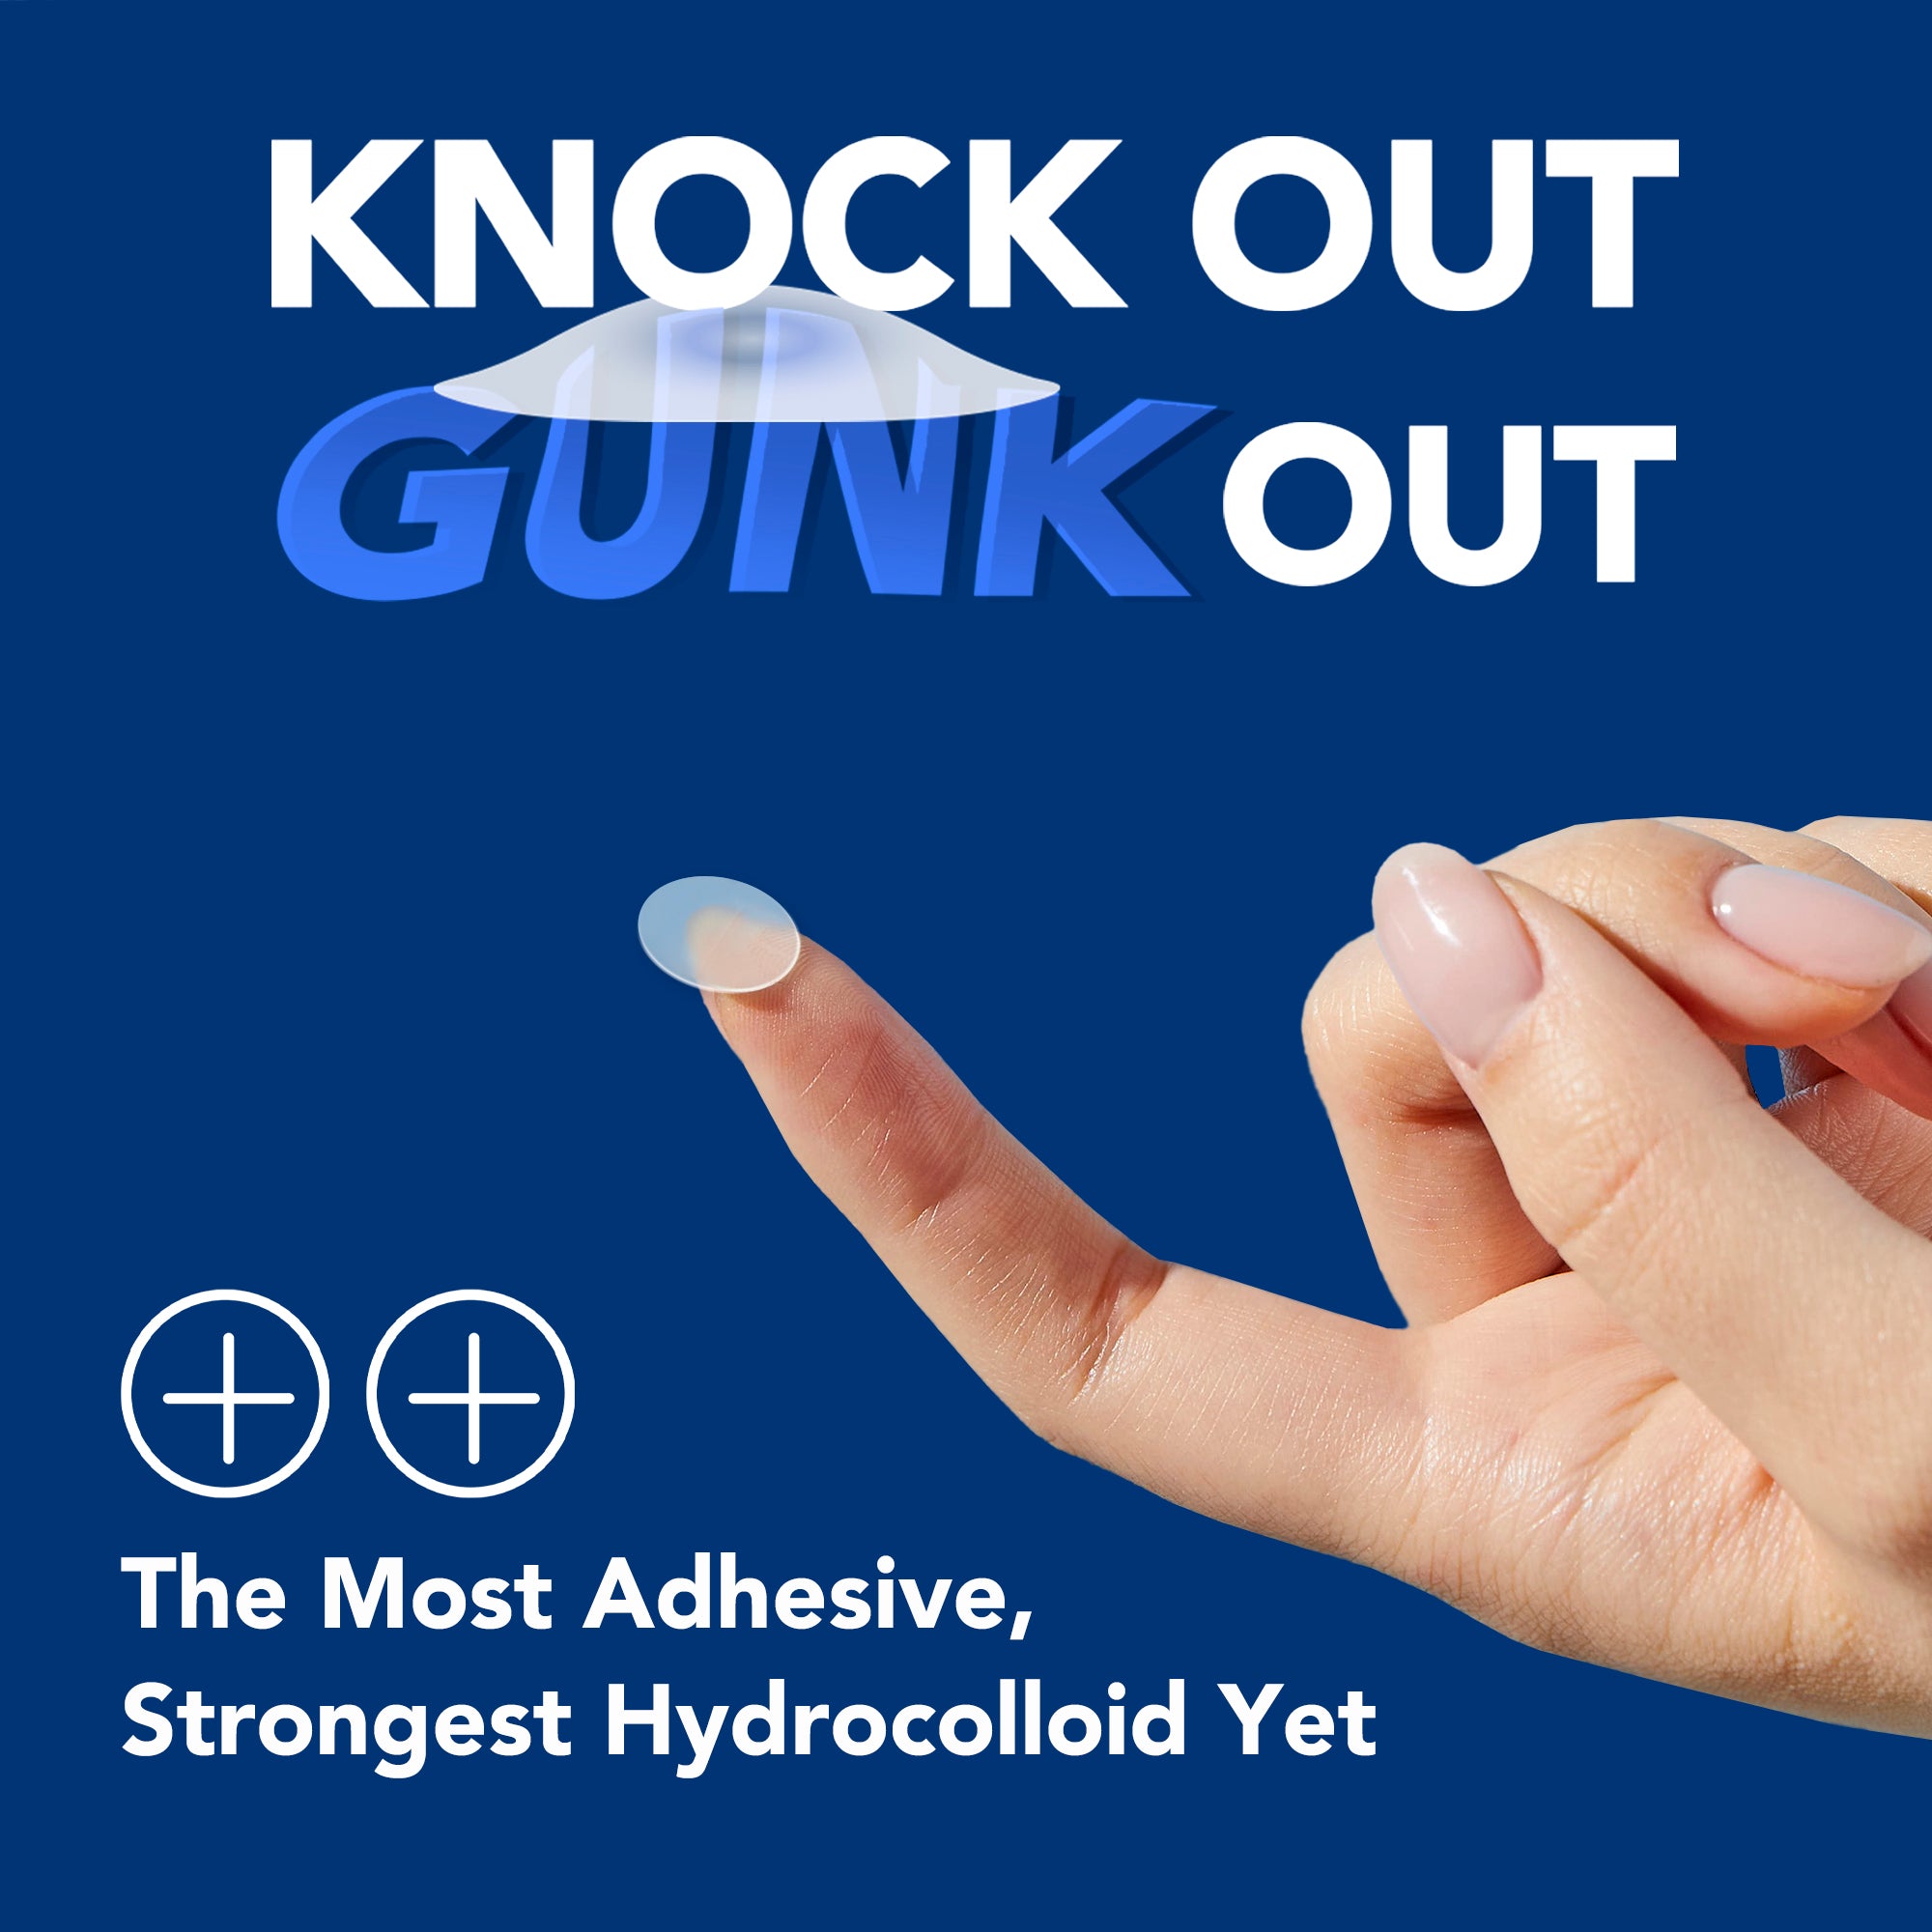 A hand displaying a small, round Avarelle GUNK OUT: Spot Tech 100CT against a blue background accompanied by a blemish treatments praising the product's adhesive effectiveness.